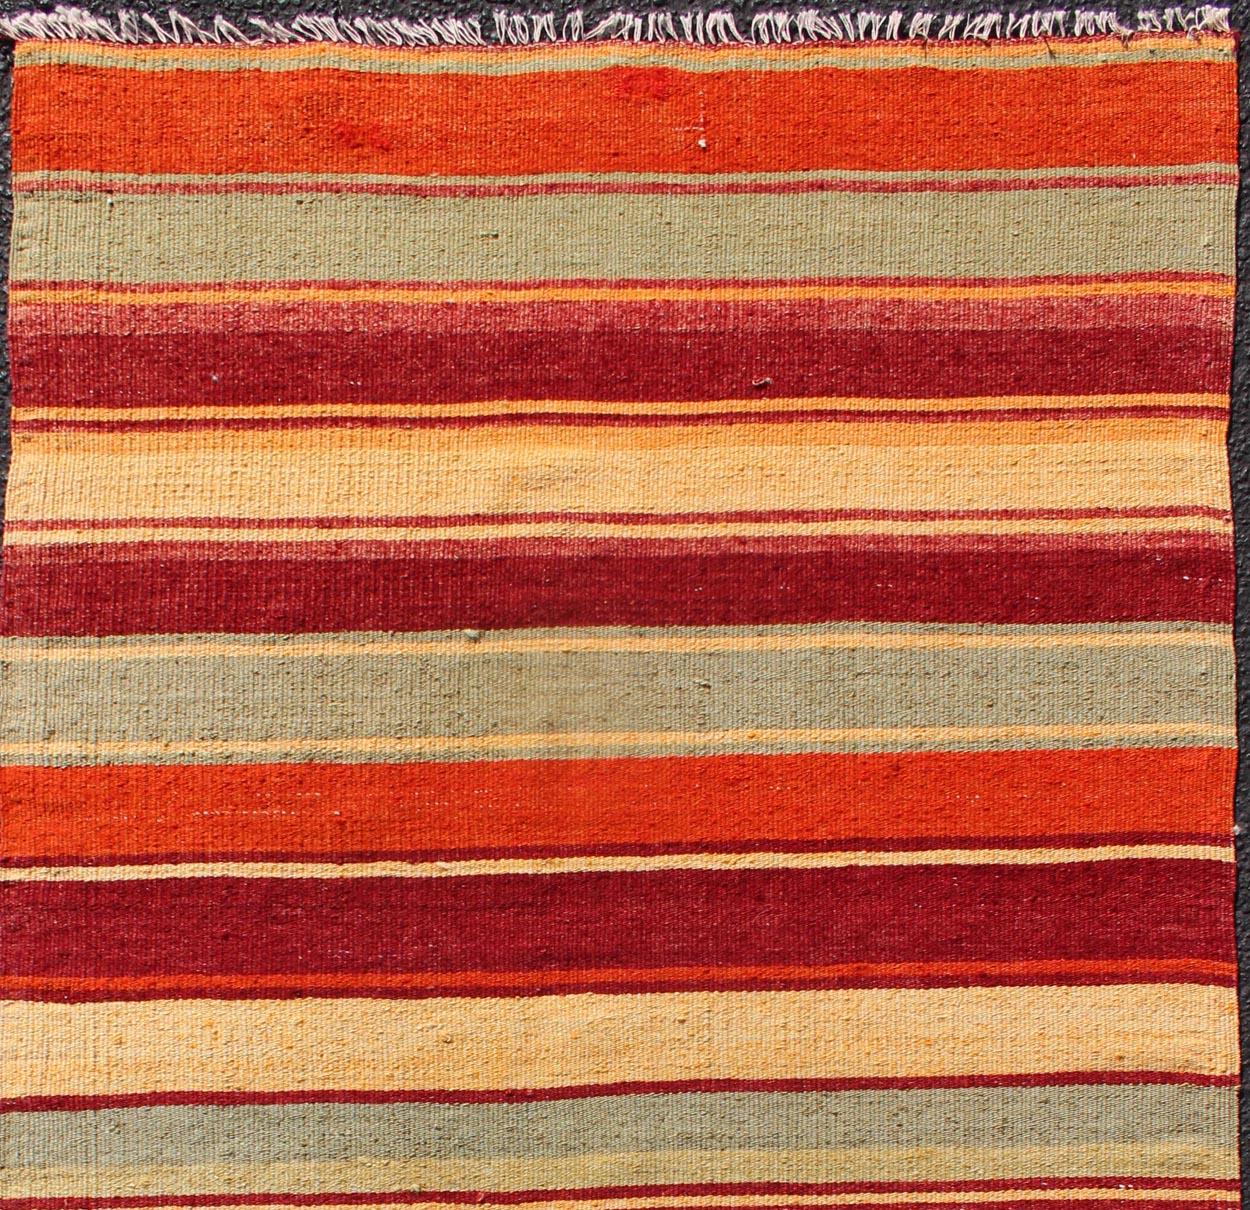 Turkish Kilim runner with stripes in red, green, yellow, orange, rug TU-NED-606, country of origin / type: Turkey / Kilim, circa mid-20th century

Woven during the mid-20th century in Turkey, this designer Kilim is decorated with a horizontal